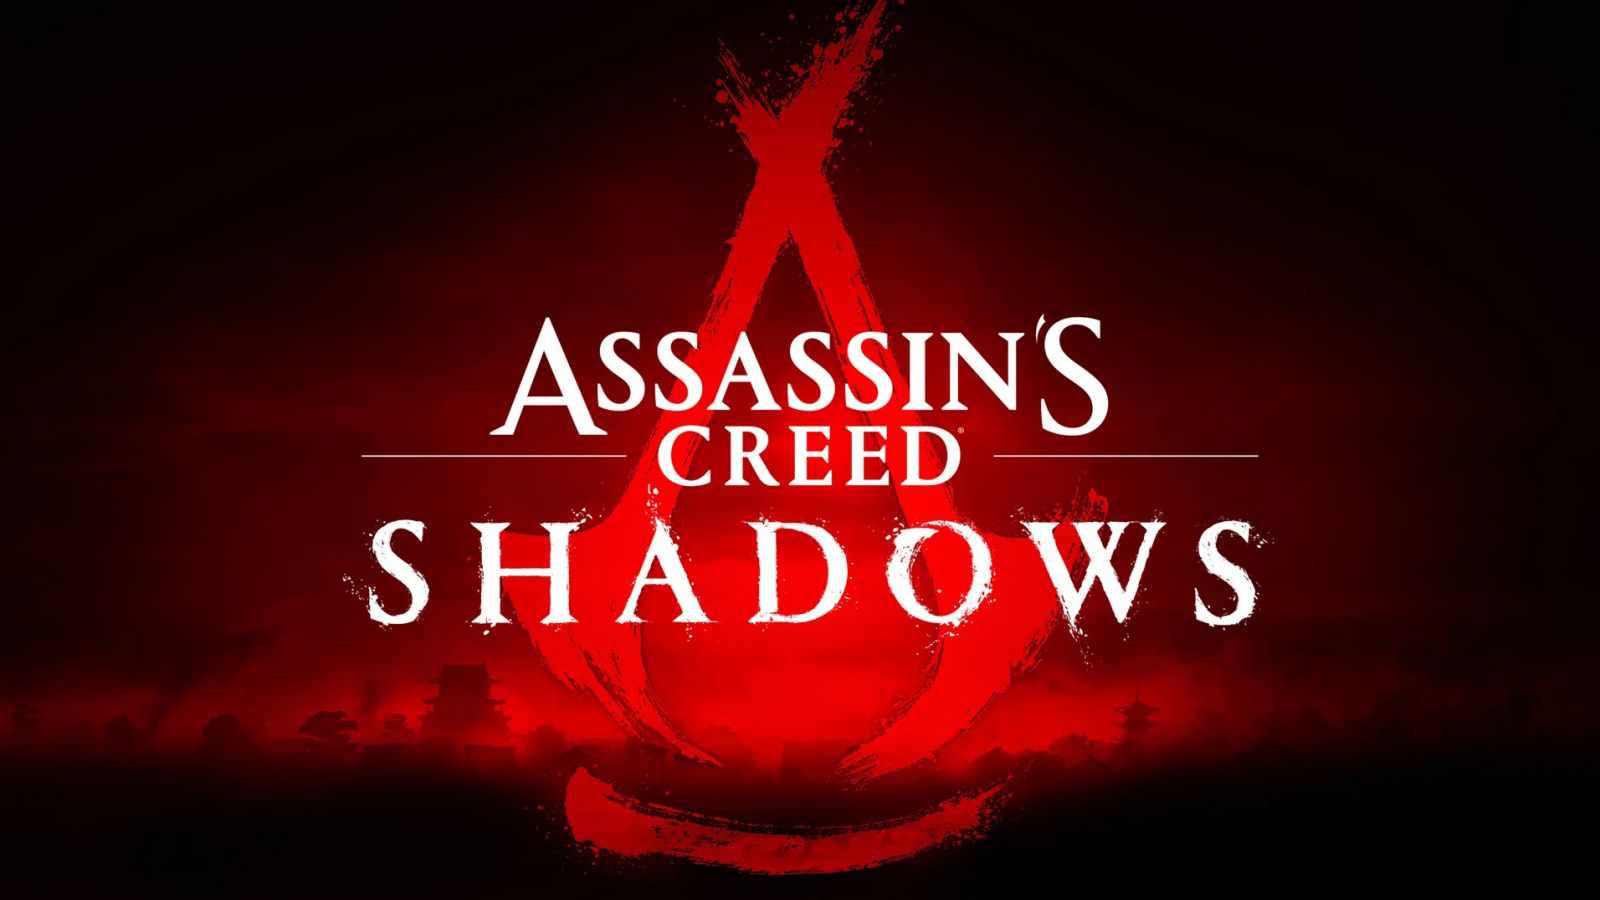 Ubisoft Announces Assassins Creed Shadows Set In Feudal Japan